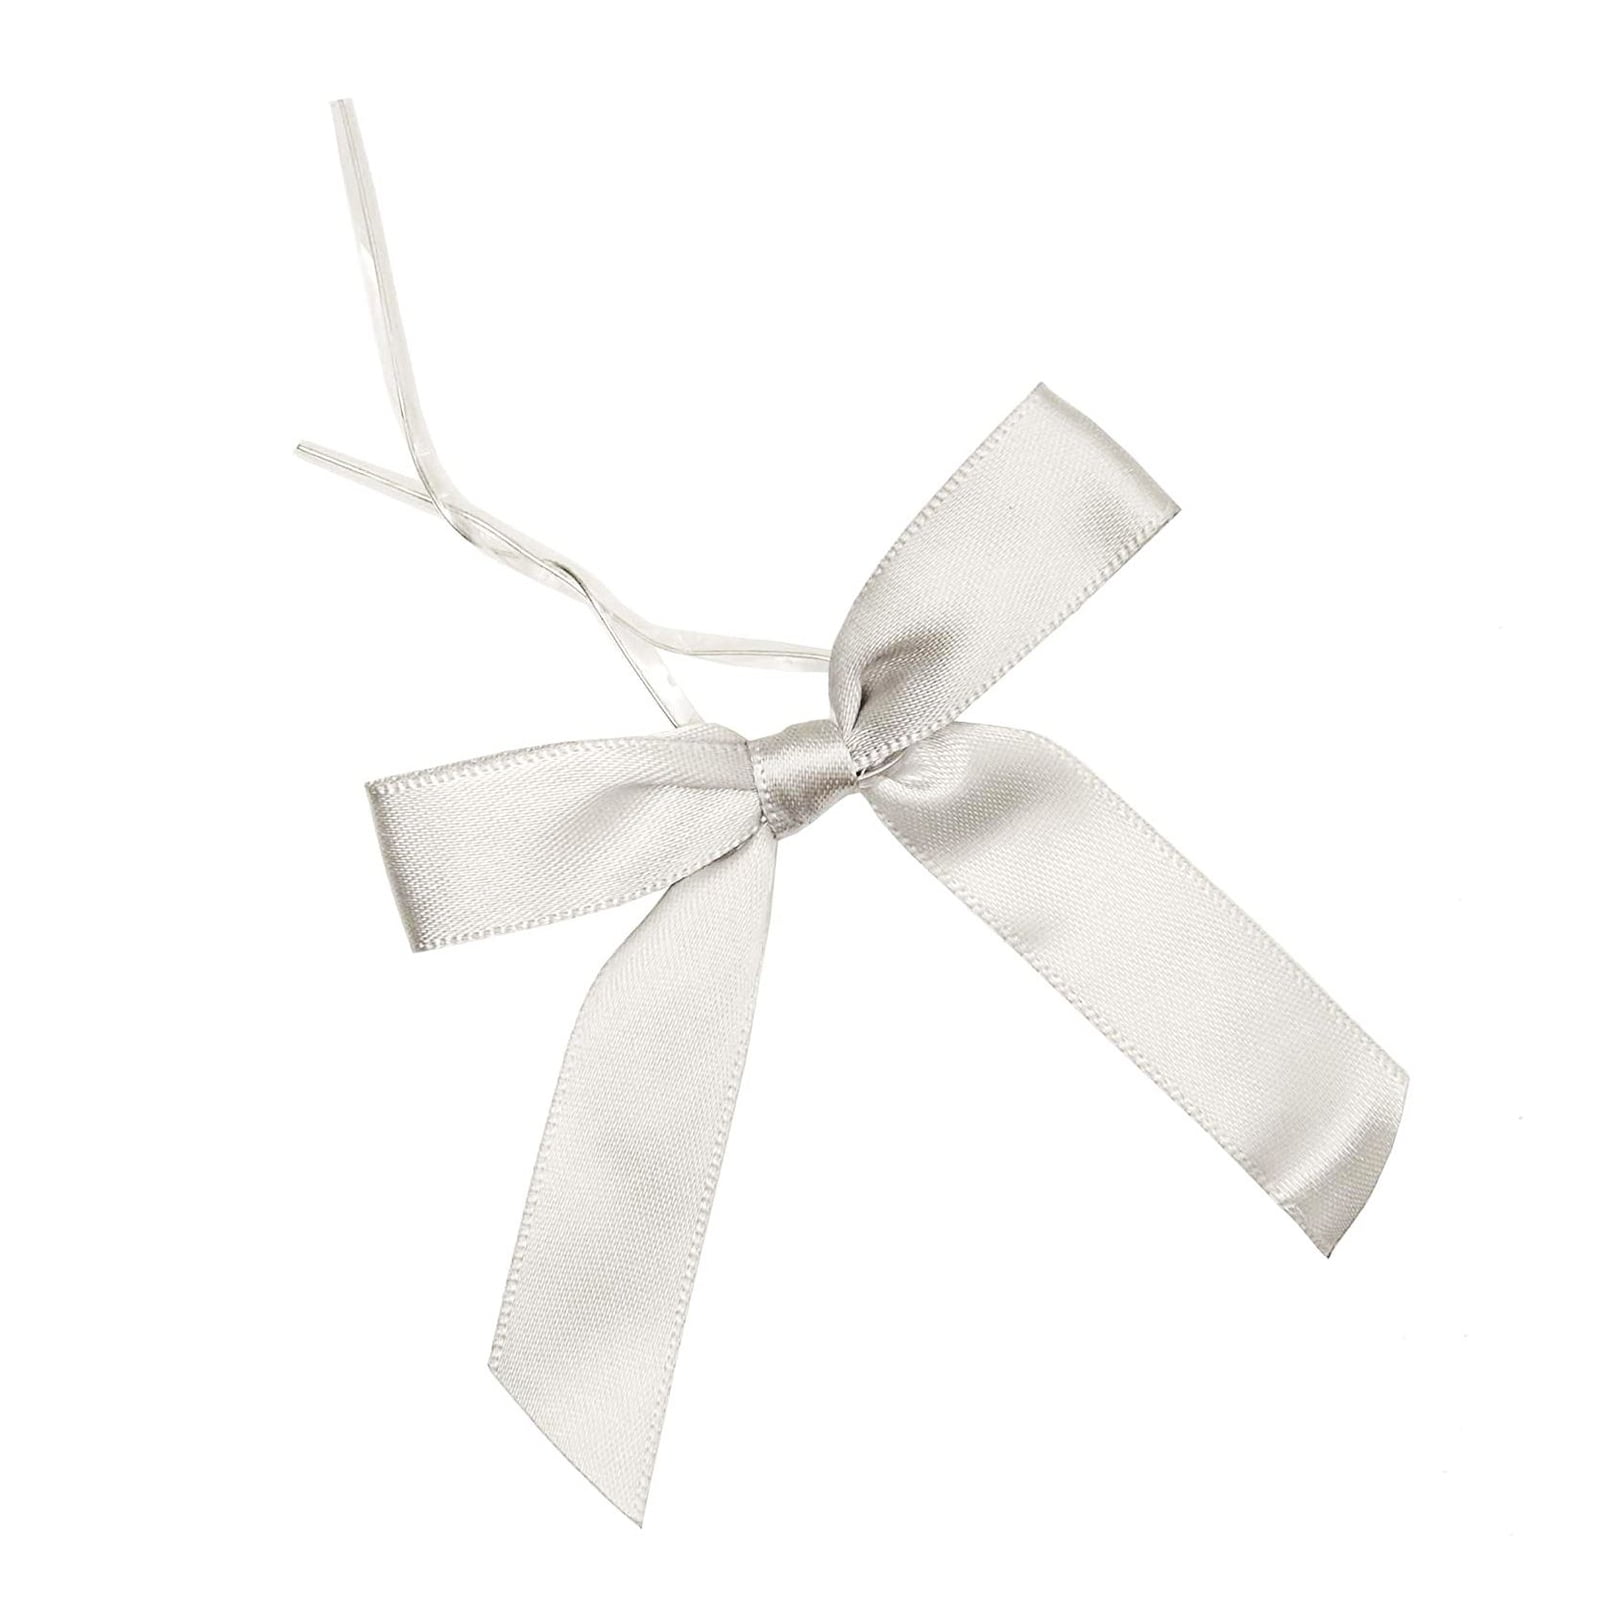 sewing baby, craft New bag of 100 white or cream mini grosgrain ribbon bows 